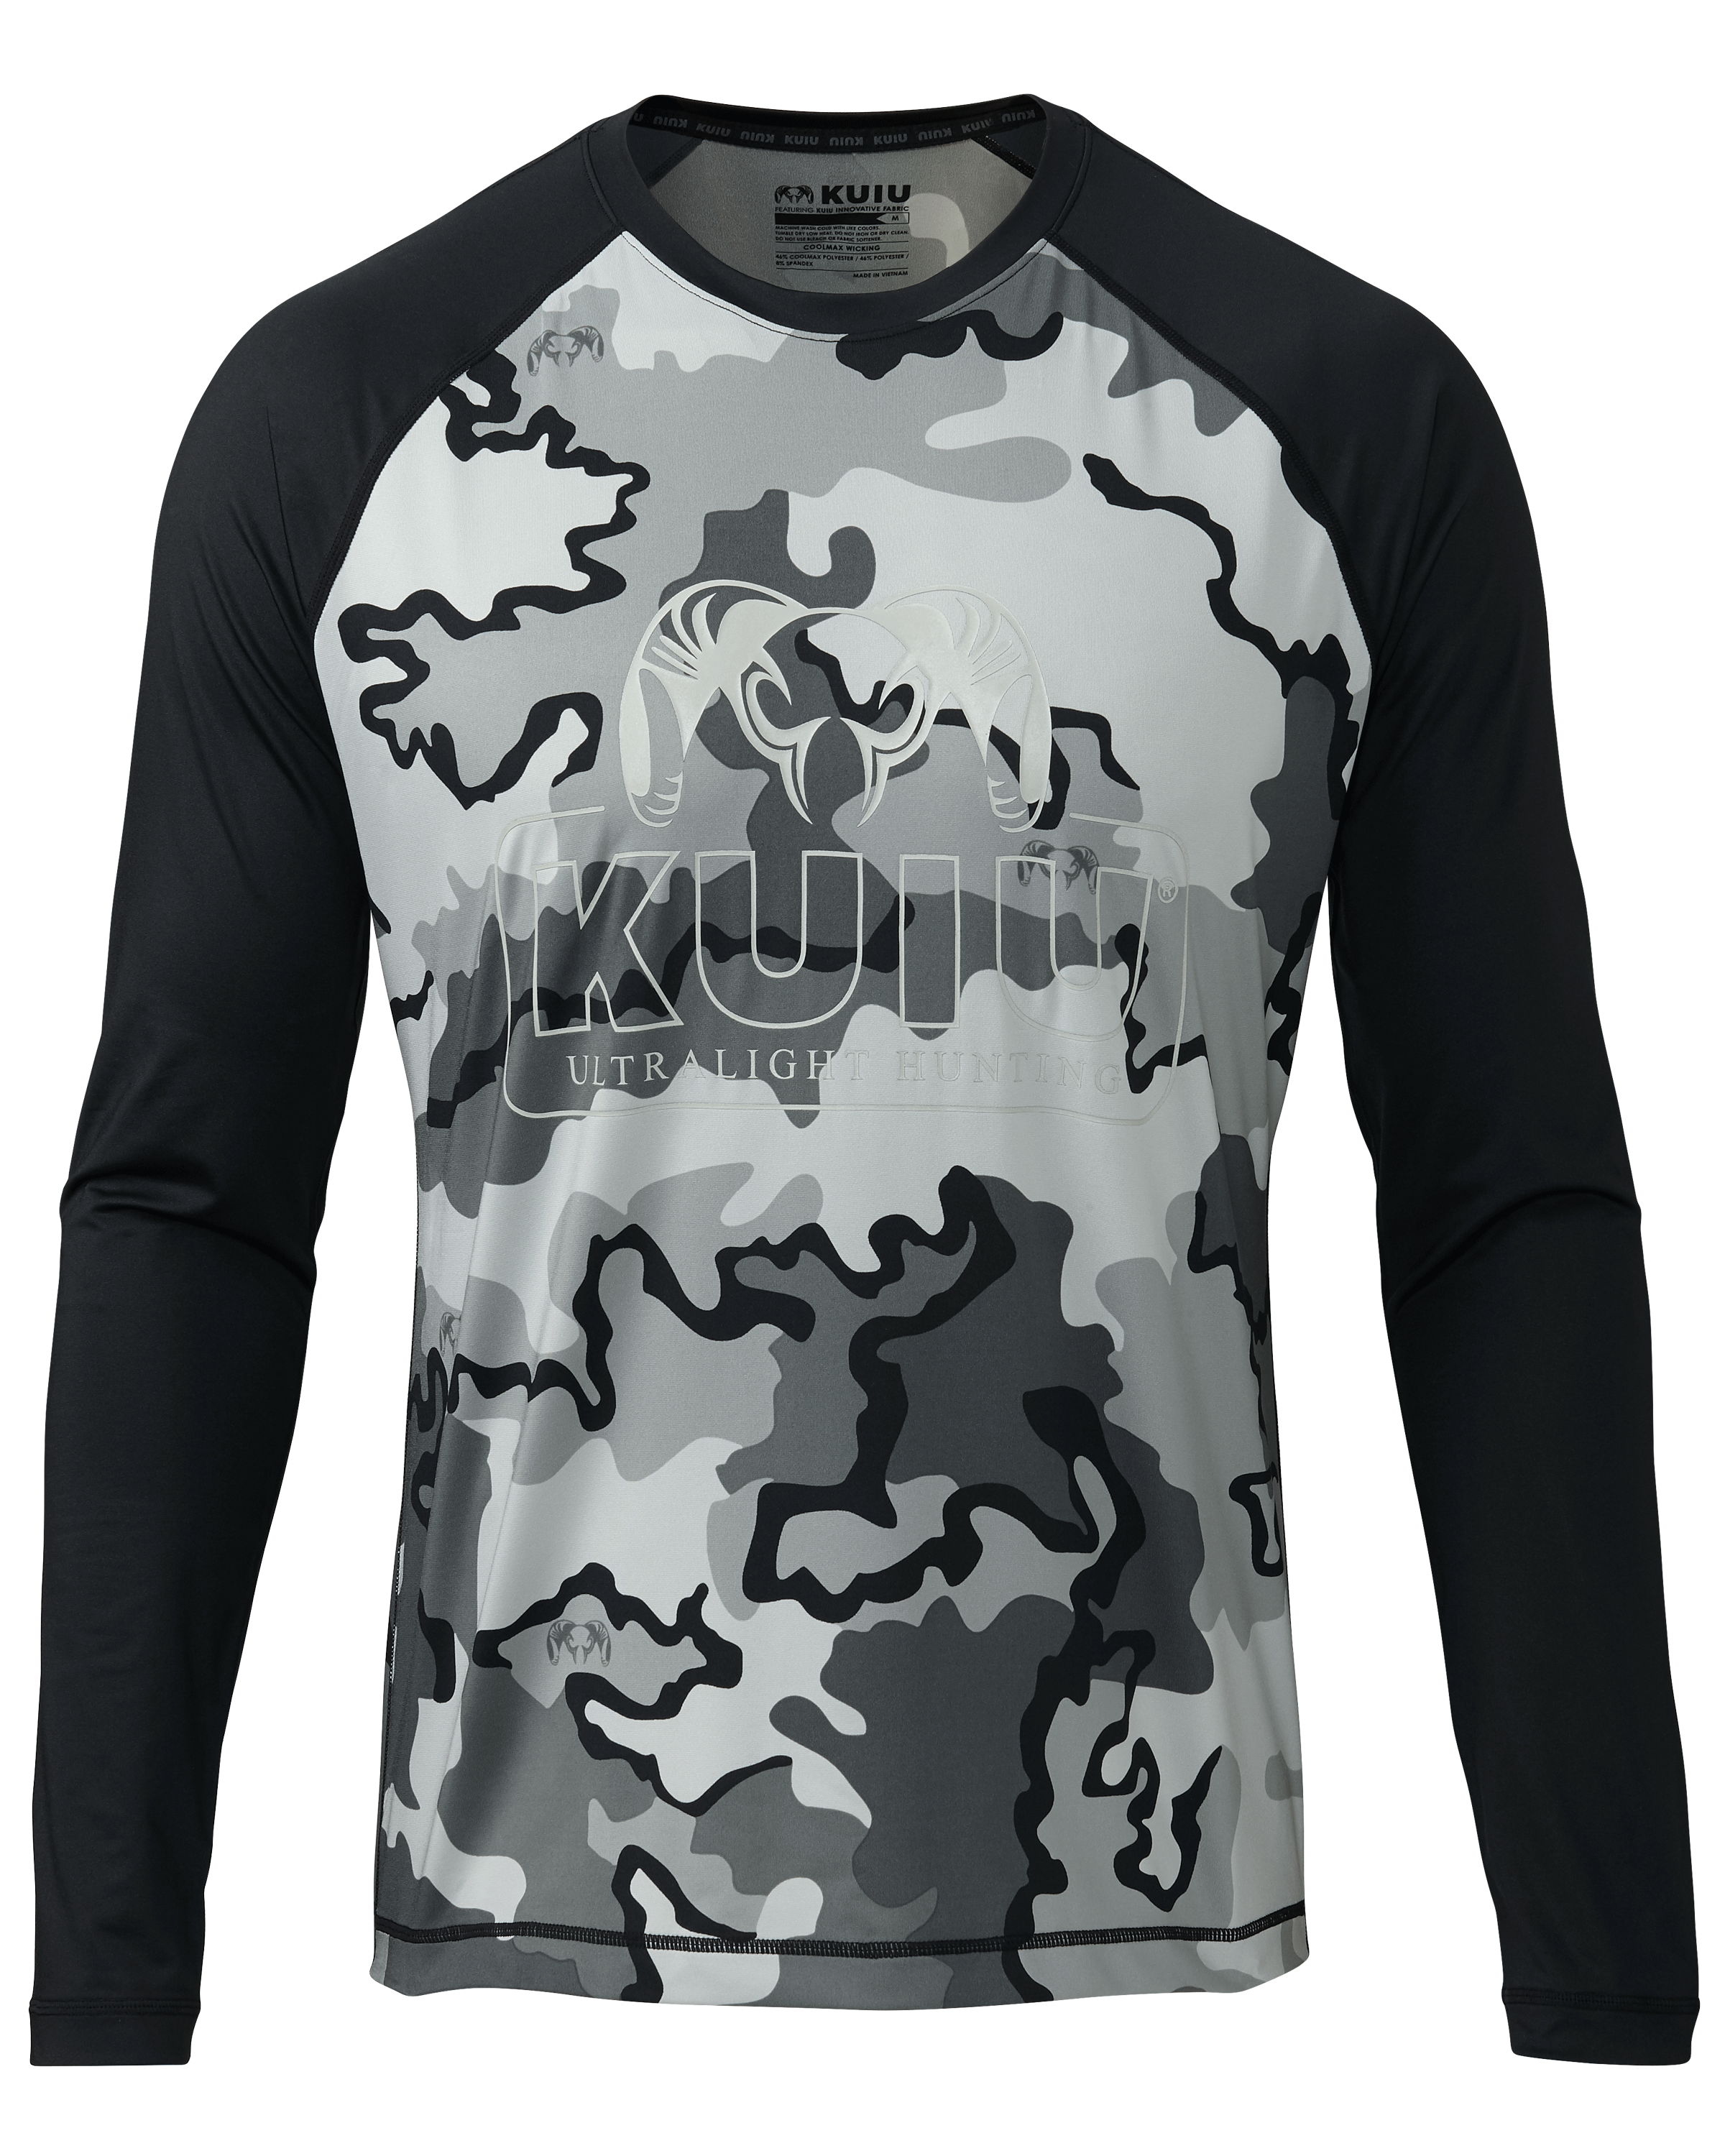 KUIU Outlet UL Ram Training Tech Long Sleeves Hunting Shirt in Vias Storm | Size XL